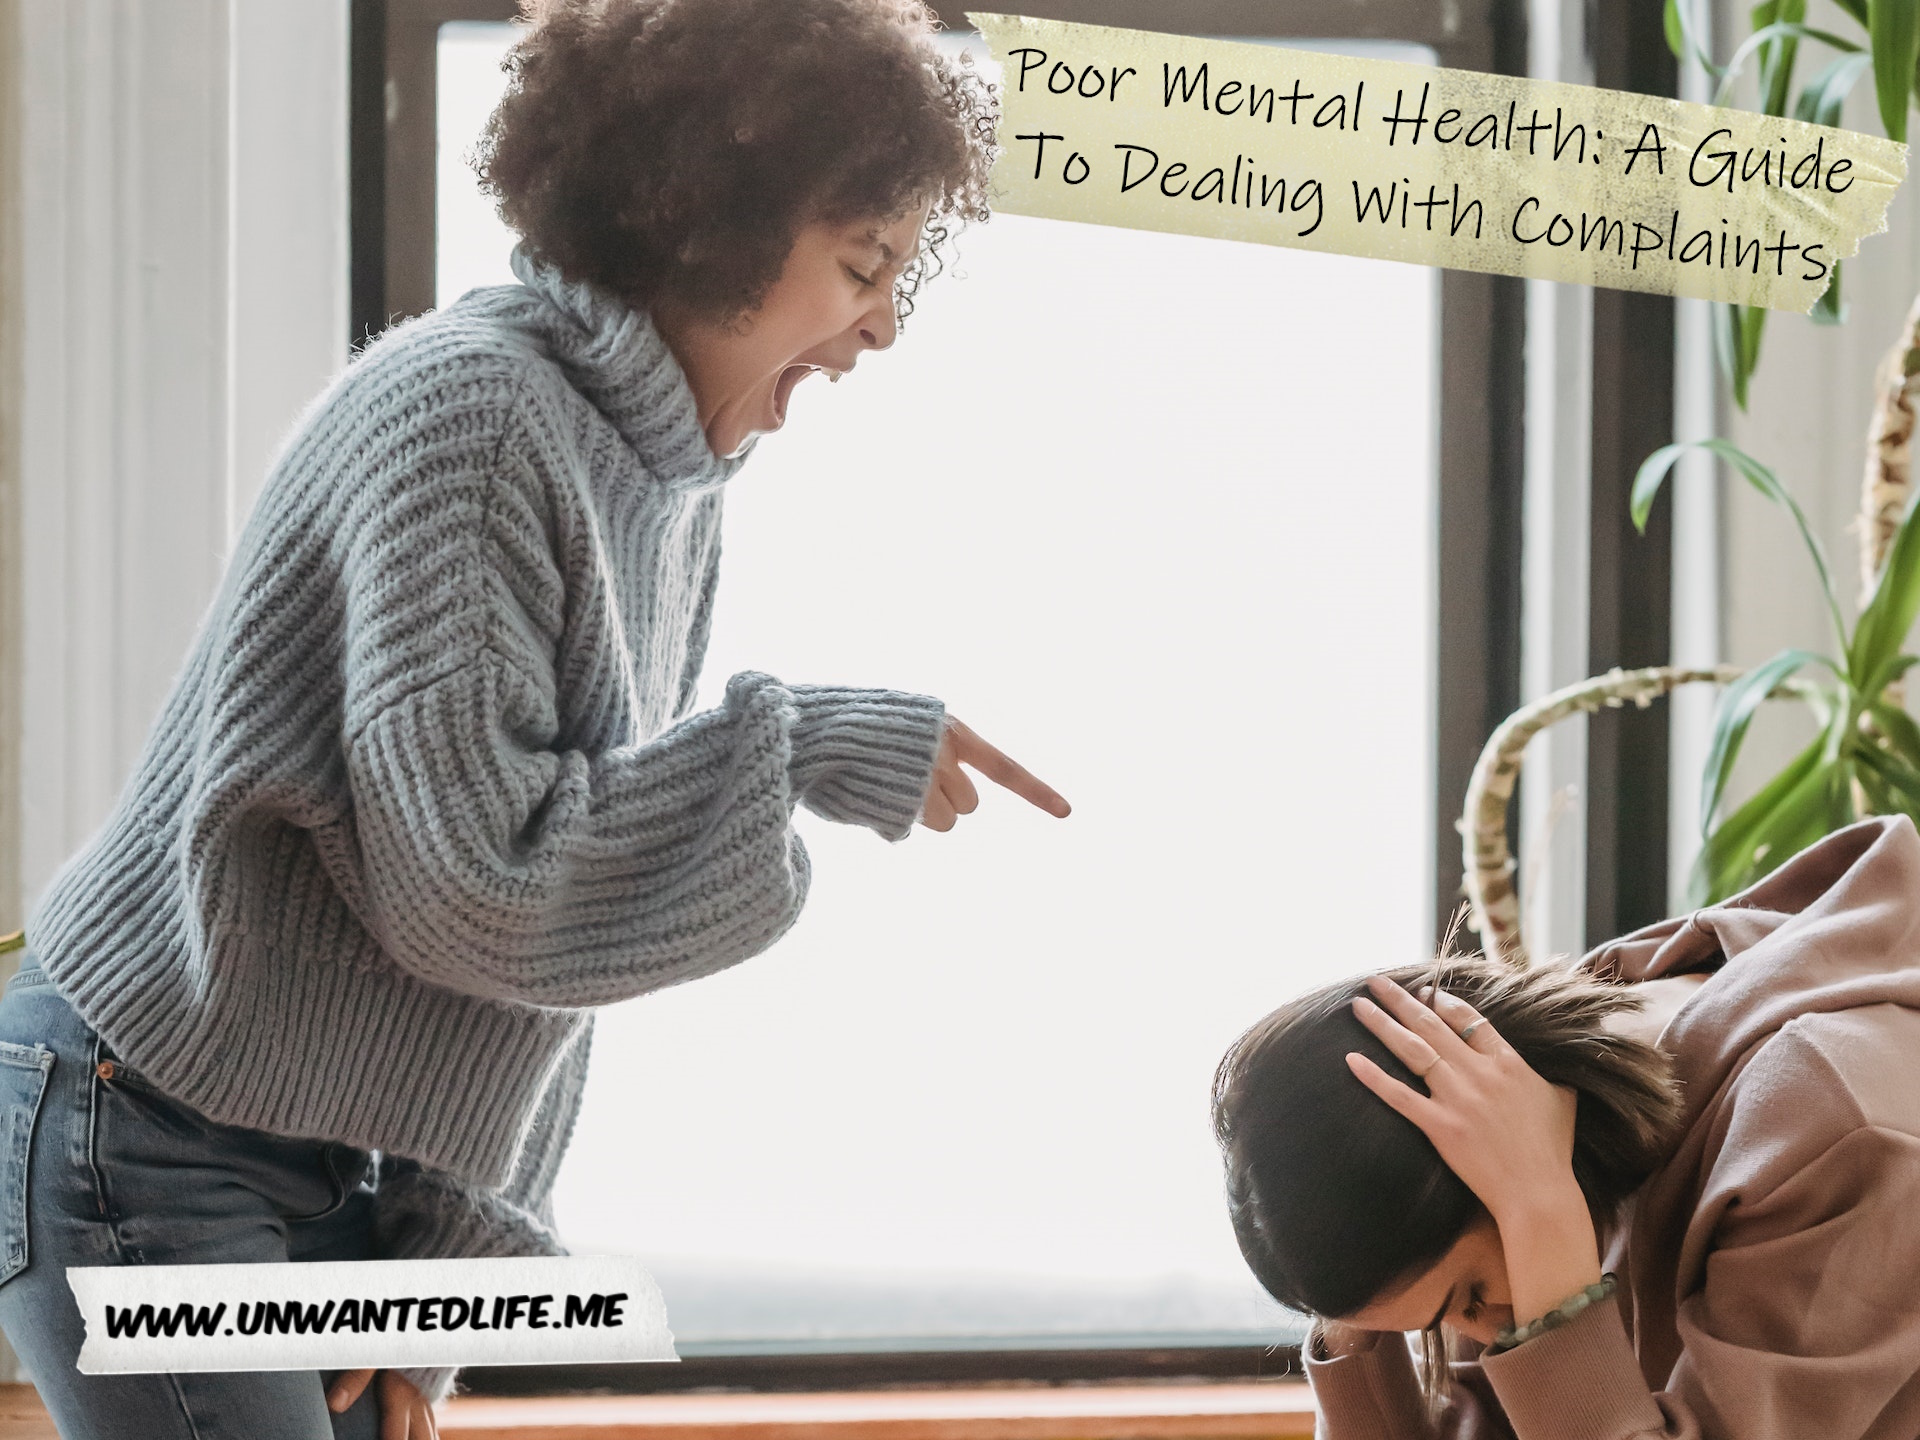 A photo of a Black woman shouting and pointing at another woman to represent the topic of the article - Poor Mental Health: A Guide To Dealing With Complaints